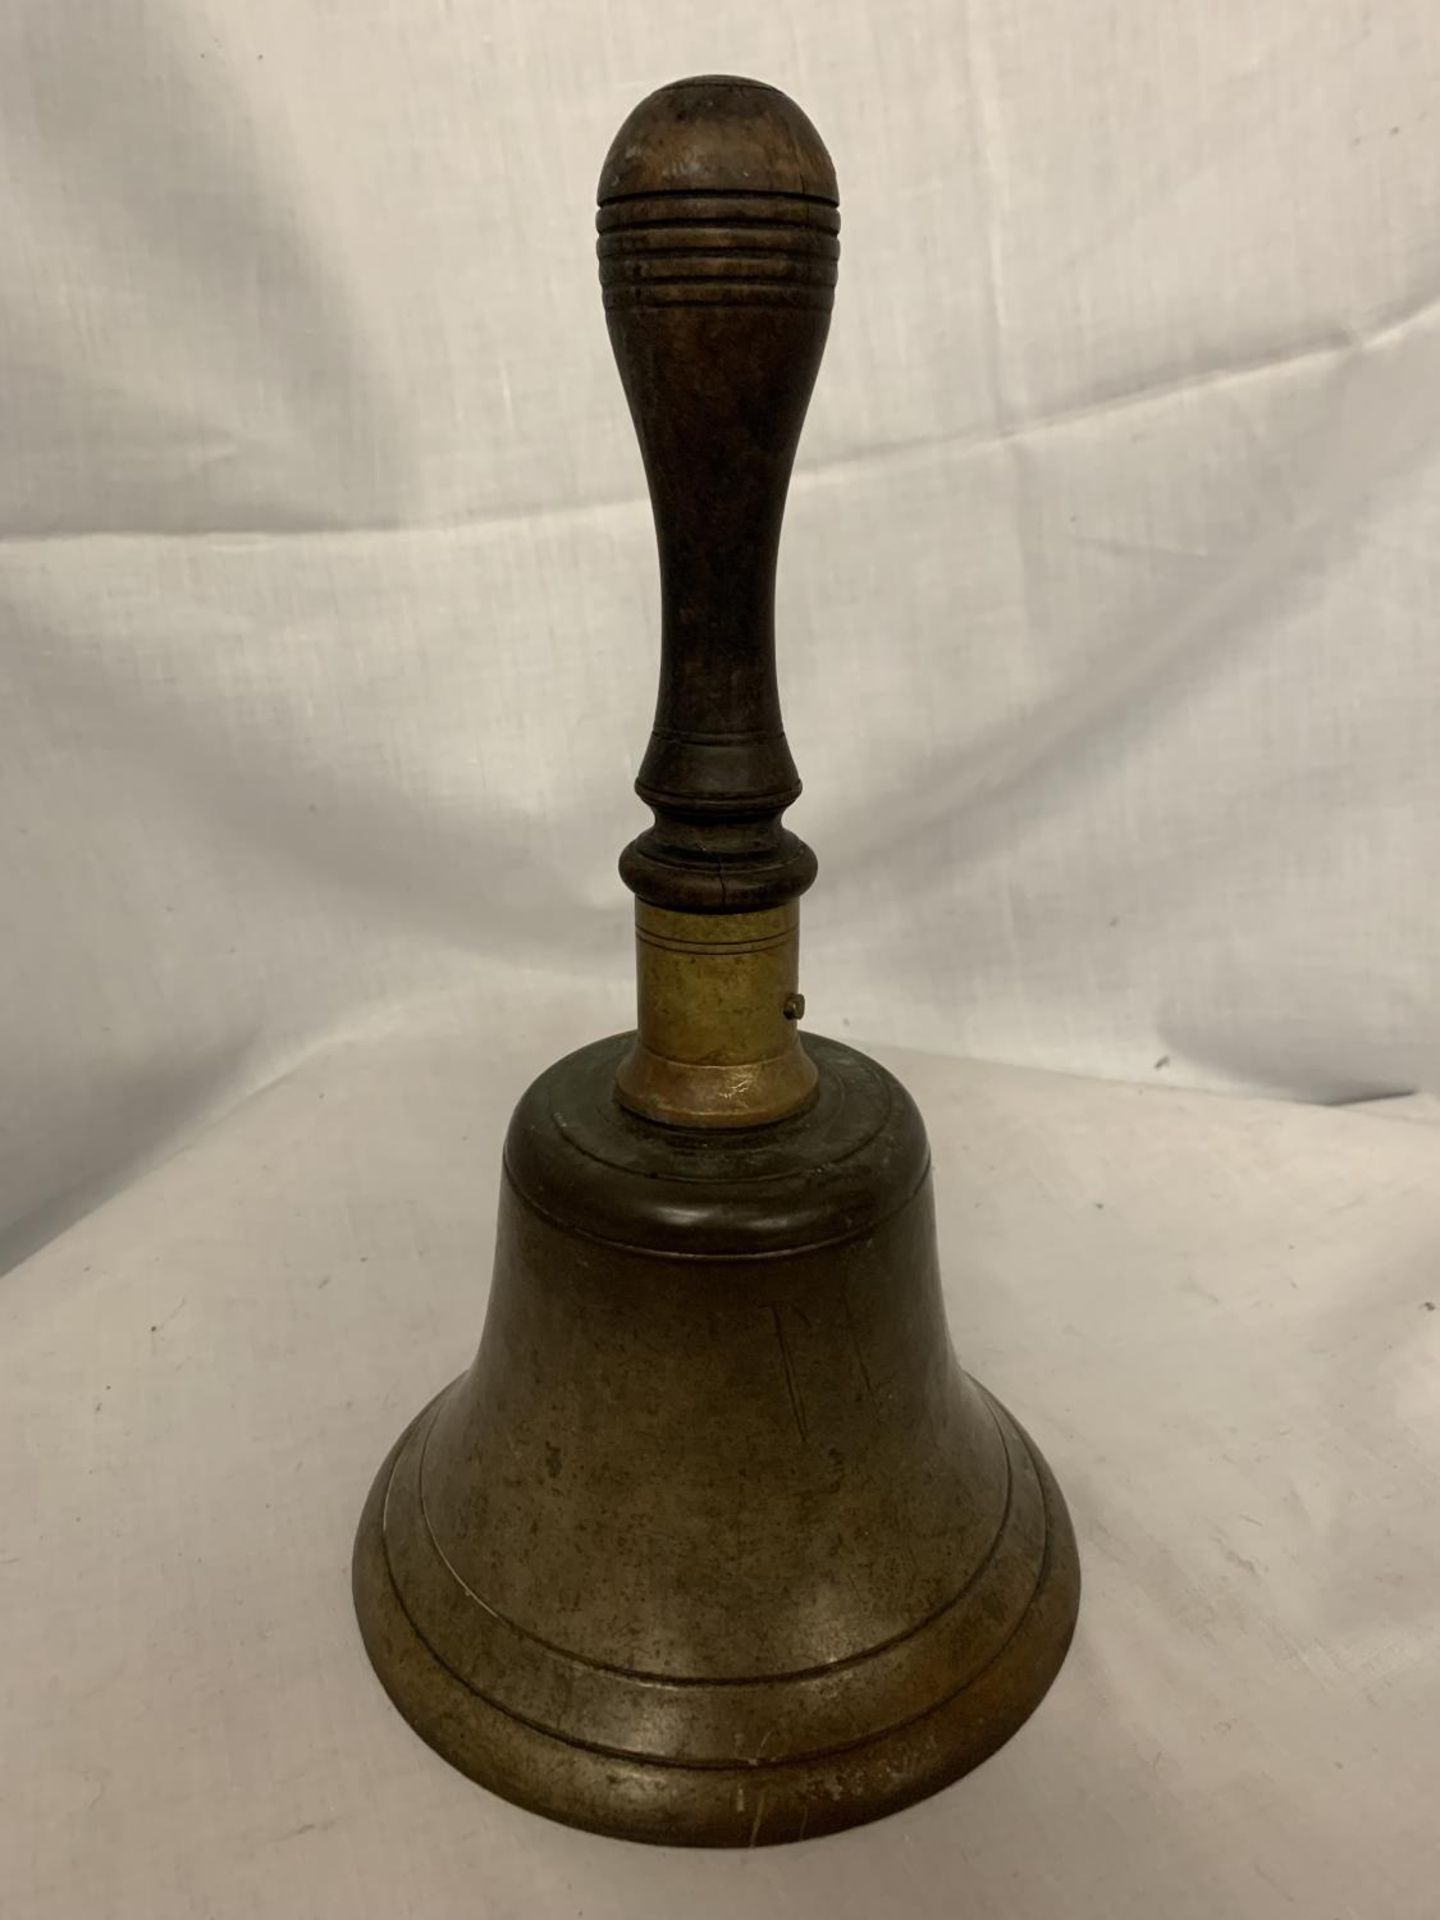 A VINTAGE BRASS SCHOOL BELL WITH WOODEN HANDLE - Image 2 of 4